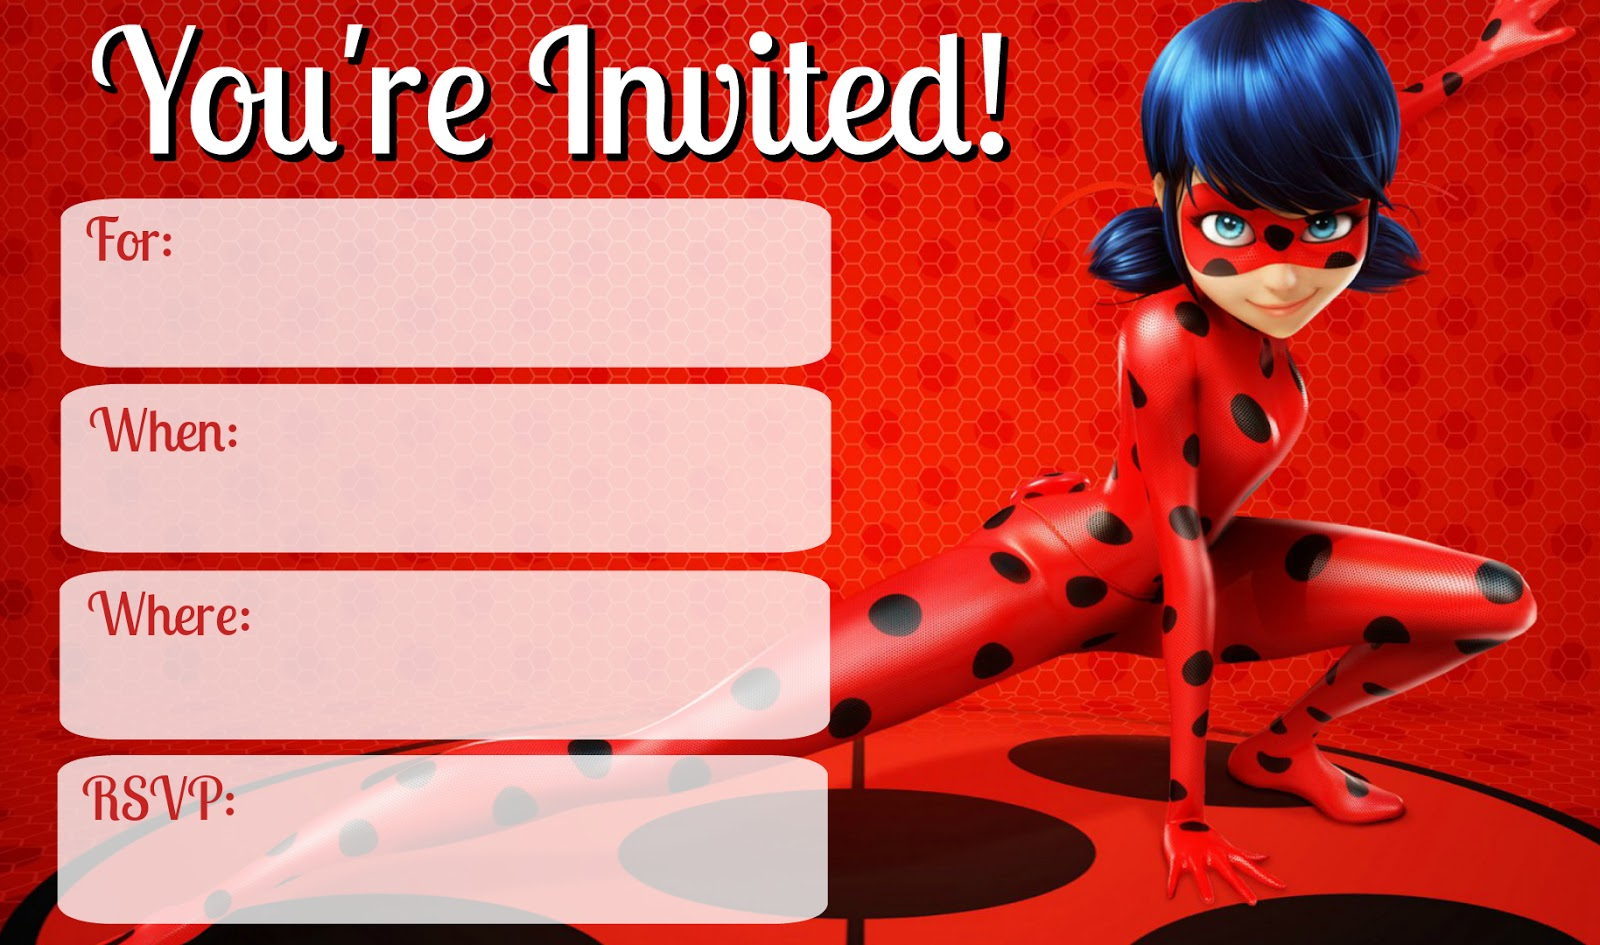 Musings Of An Average Mom: Miraculous Party Invitations - Free Printable Ladybug Invitations